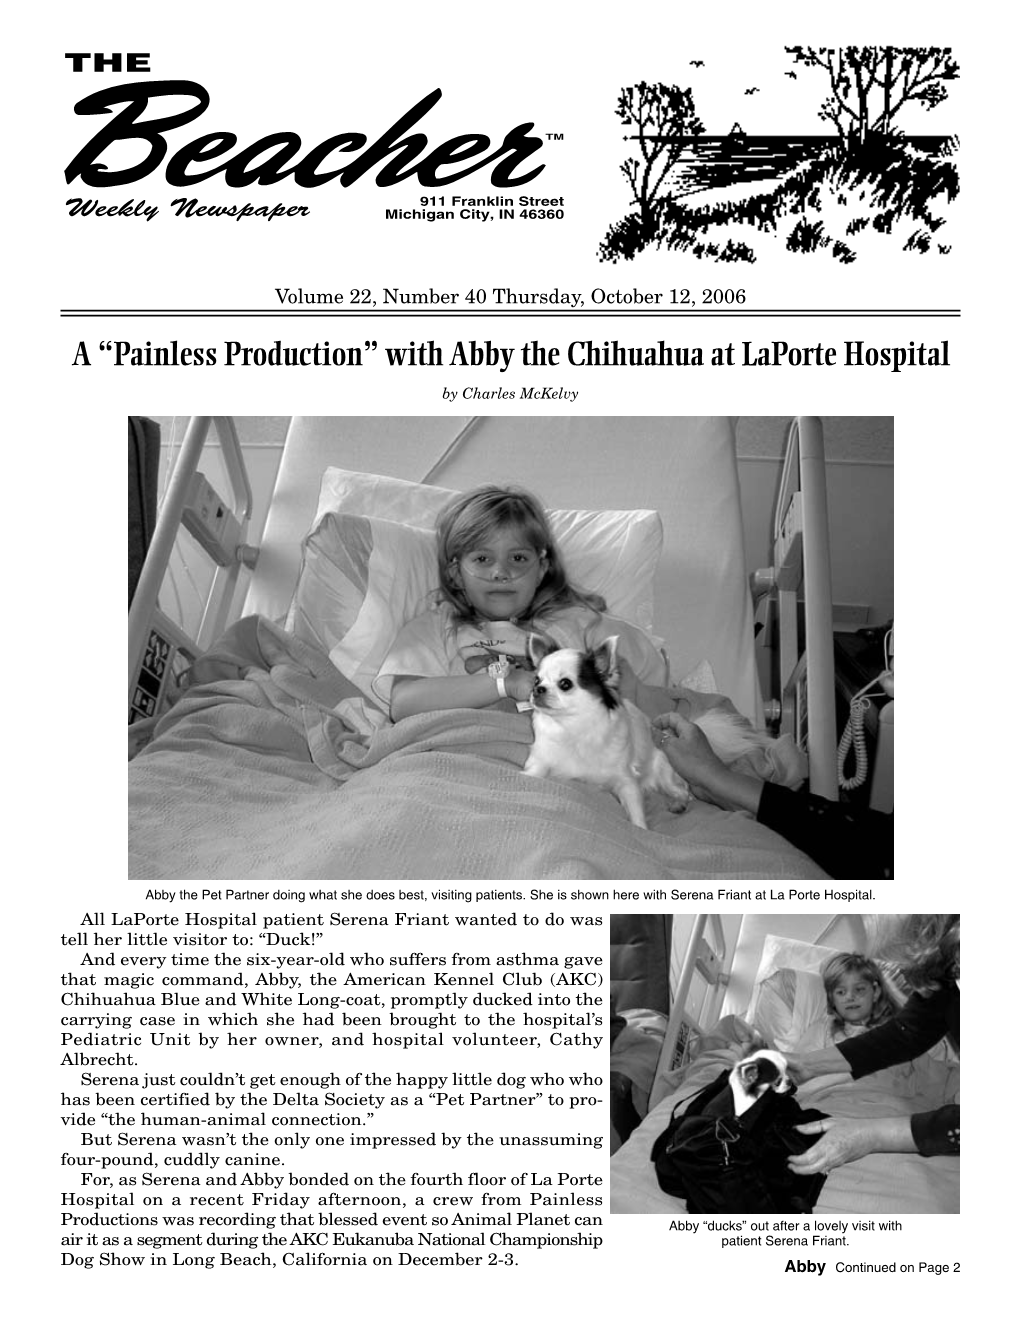 With Abby the Chihuahua at Laporte Hospital by Charles Mckelvy